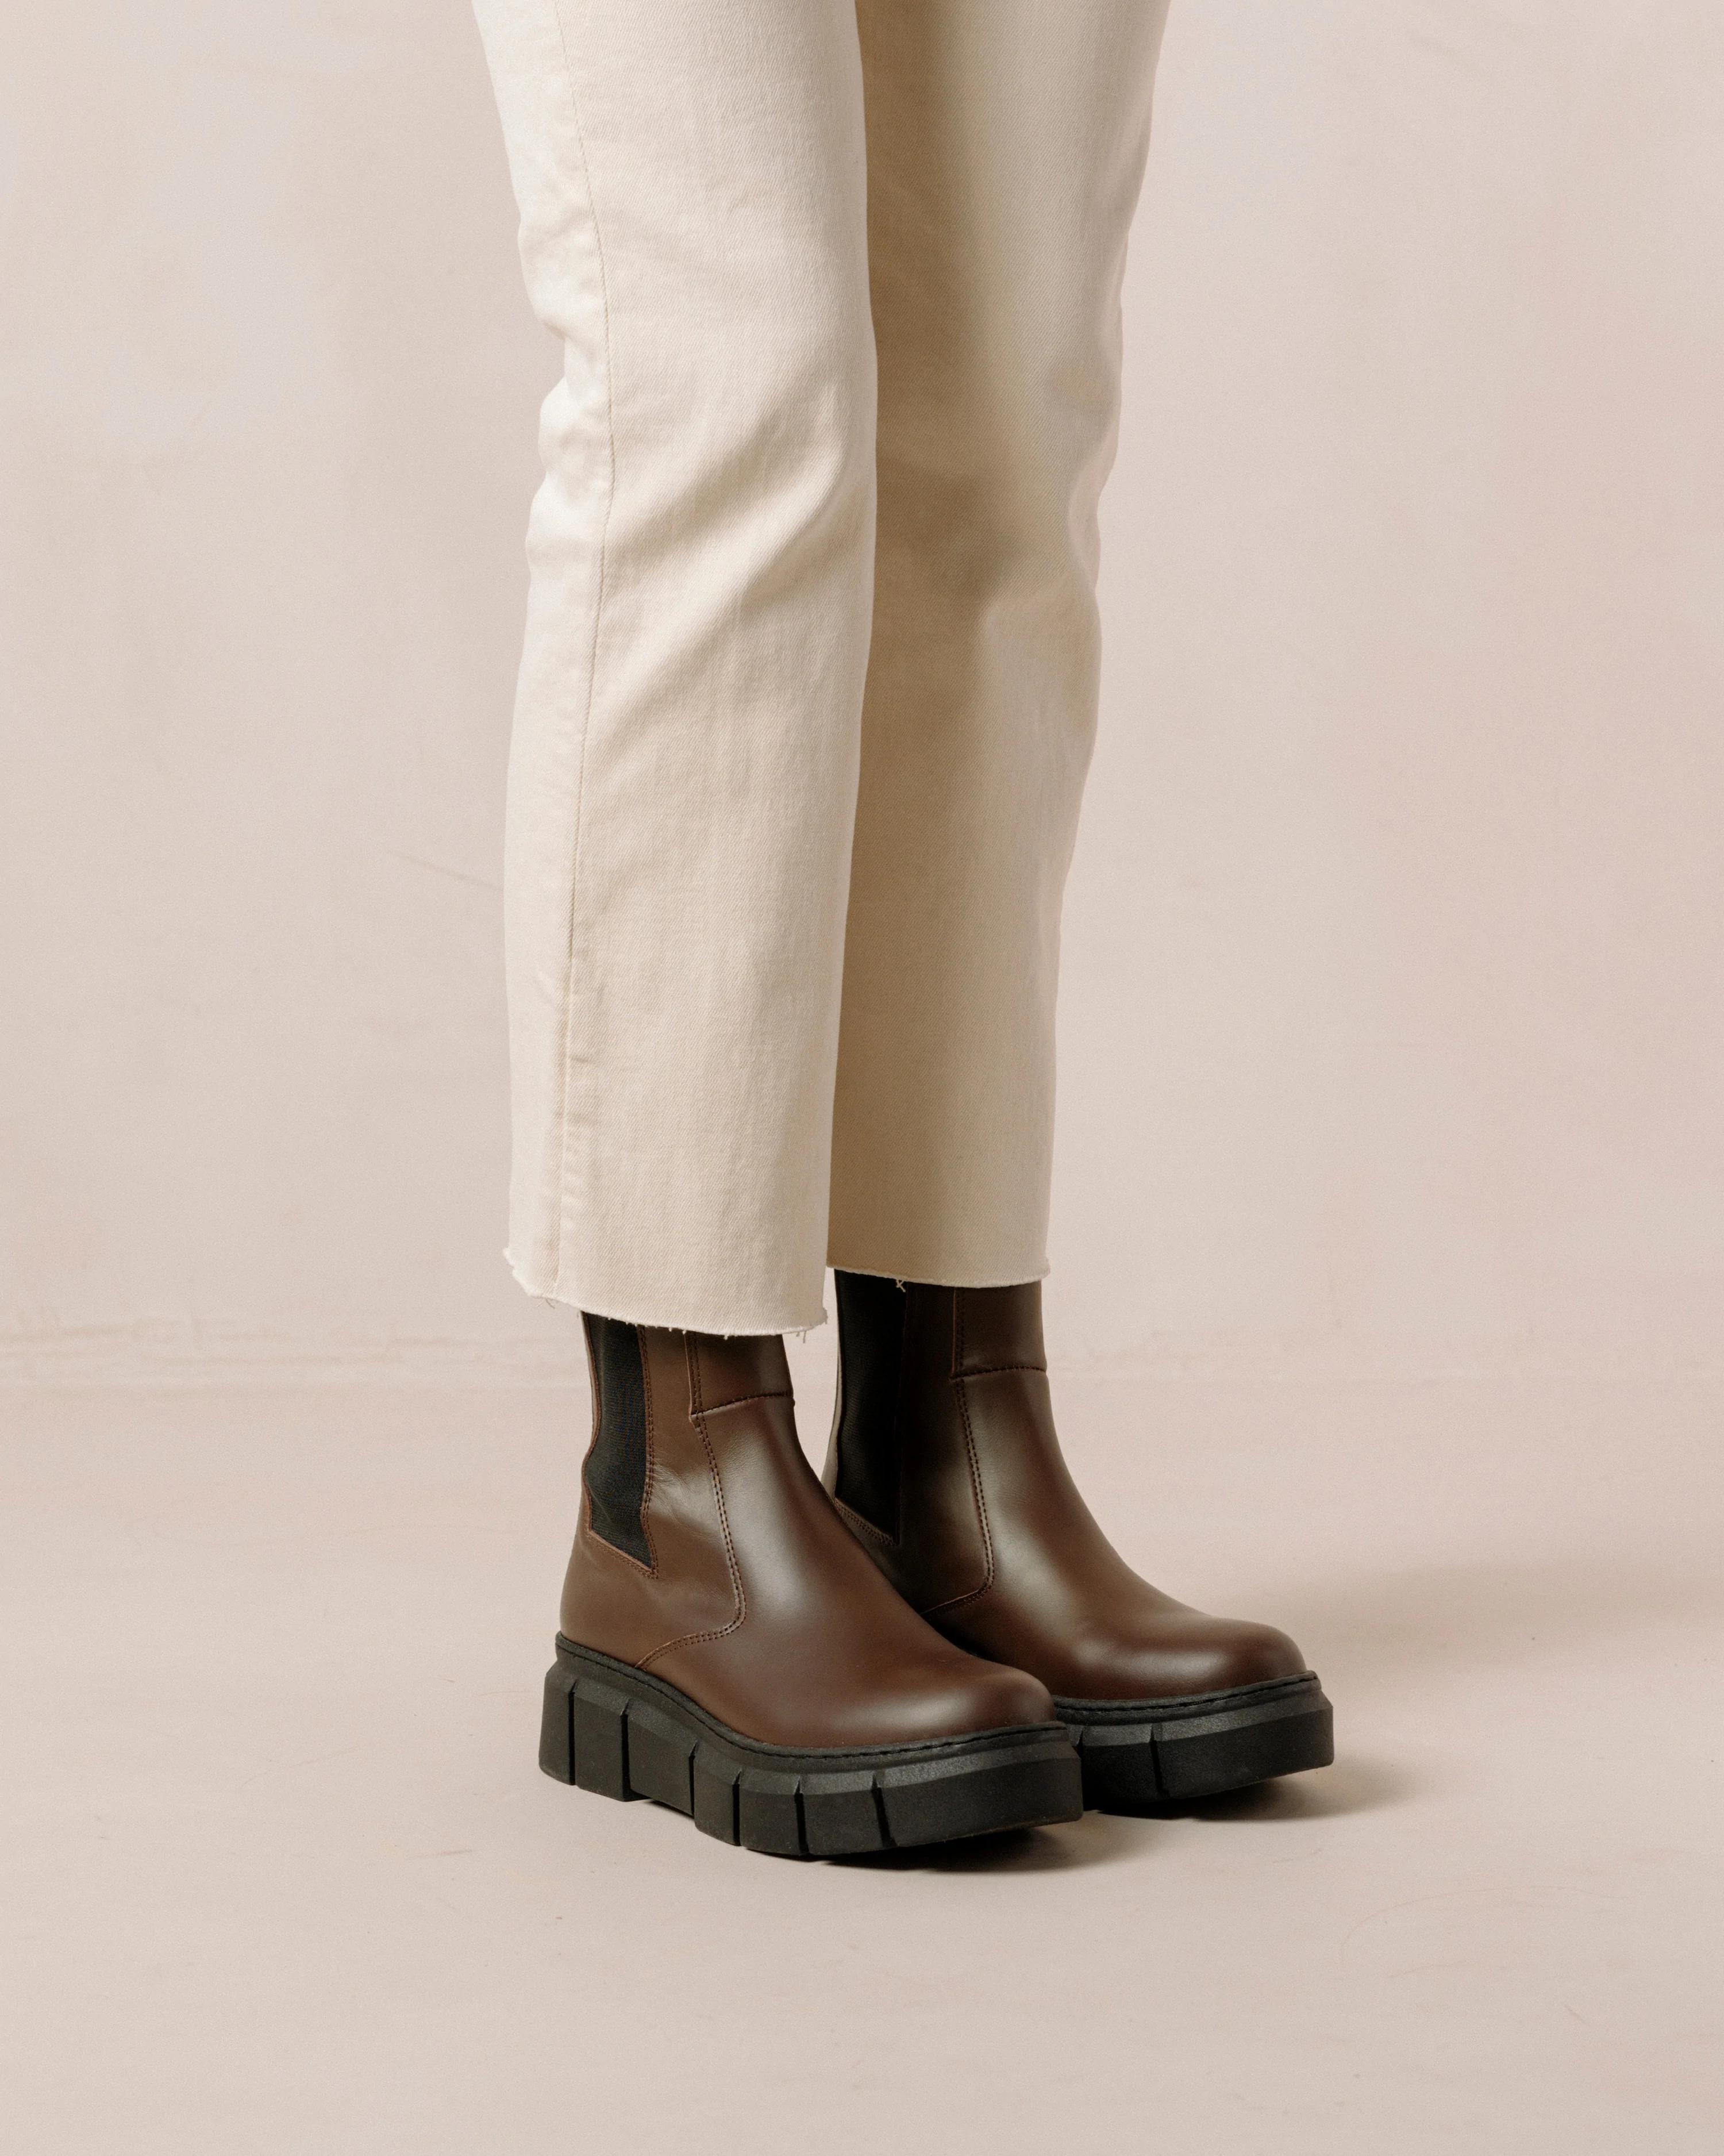 Product Image for Armor Leather Boots, Coffee Brown